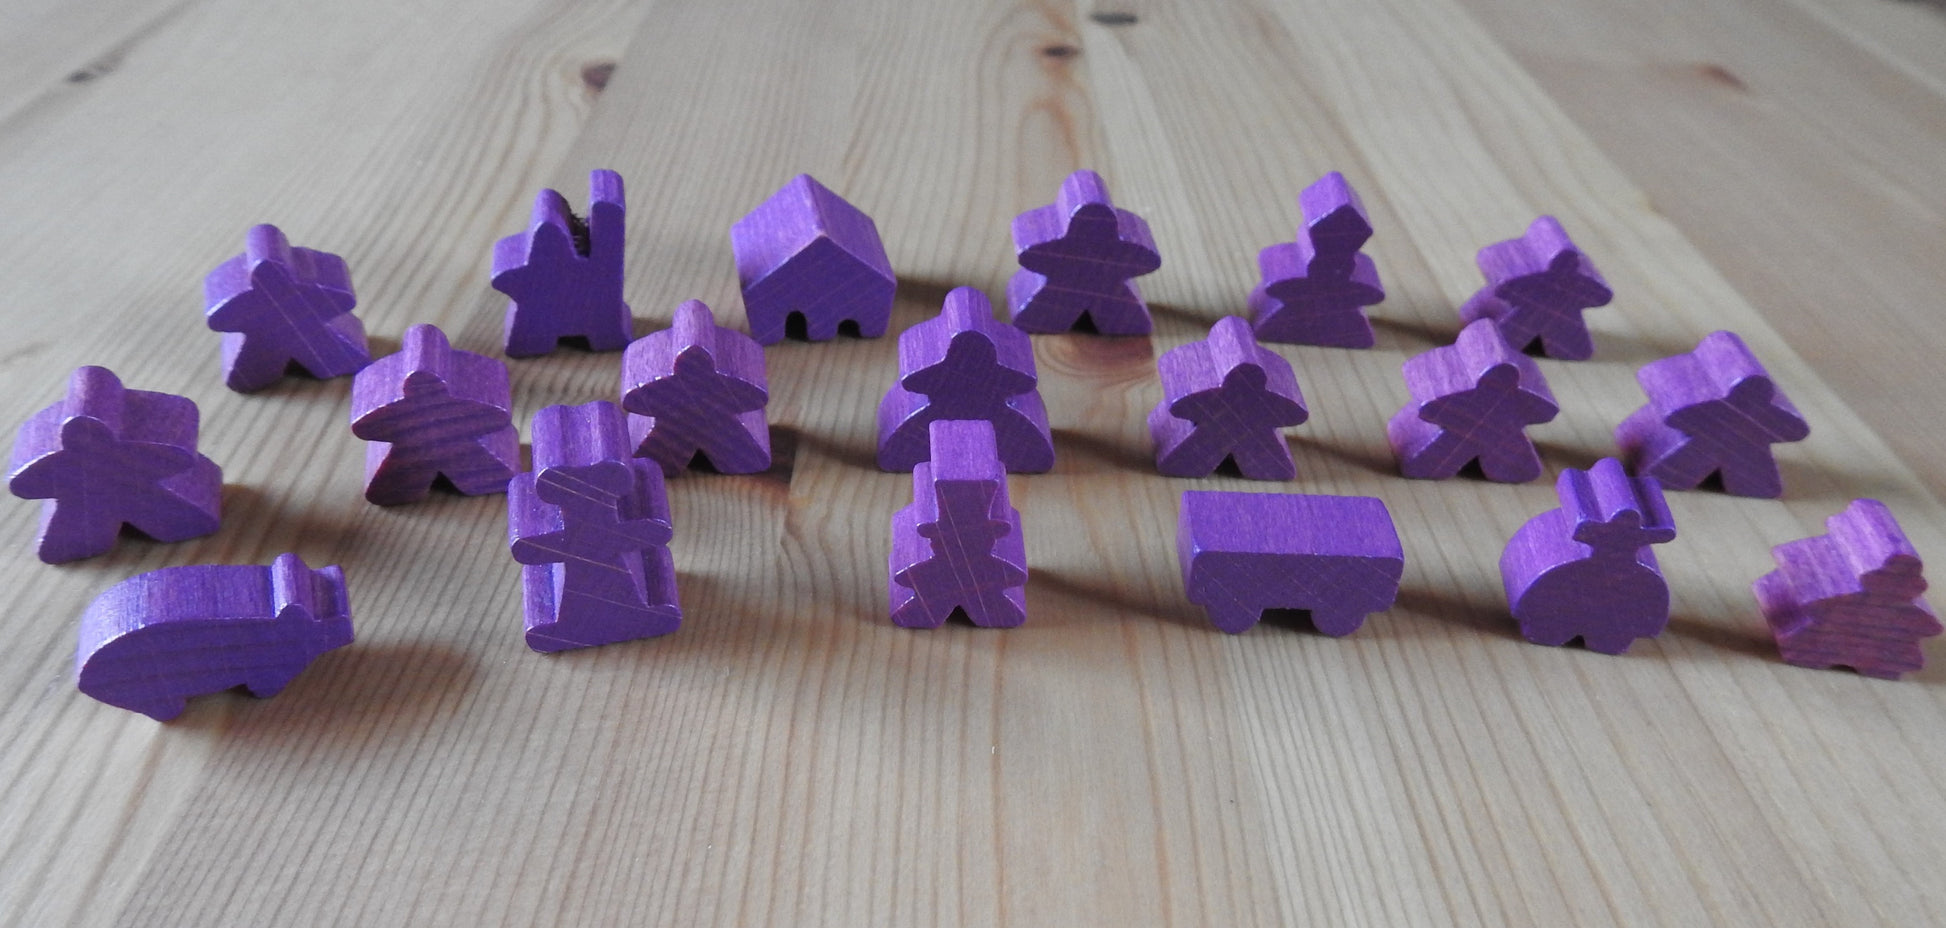 Close-up view of the purple wooden meeple set.